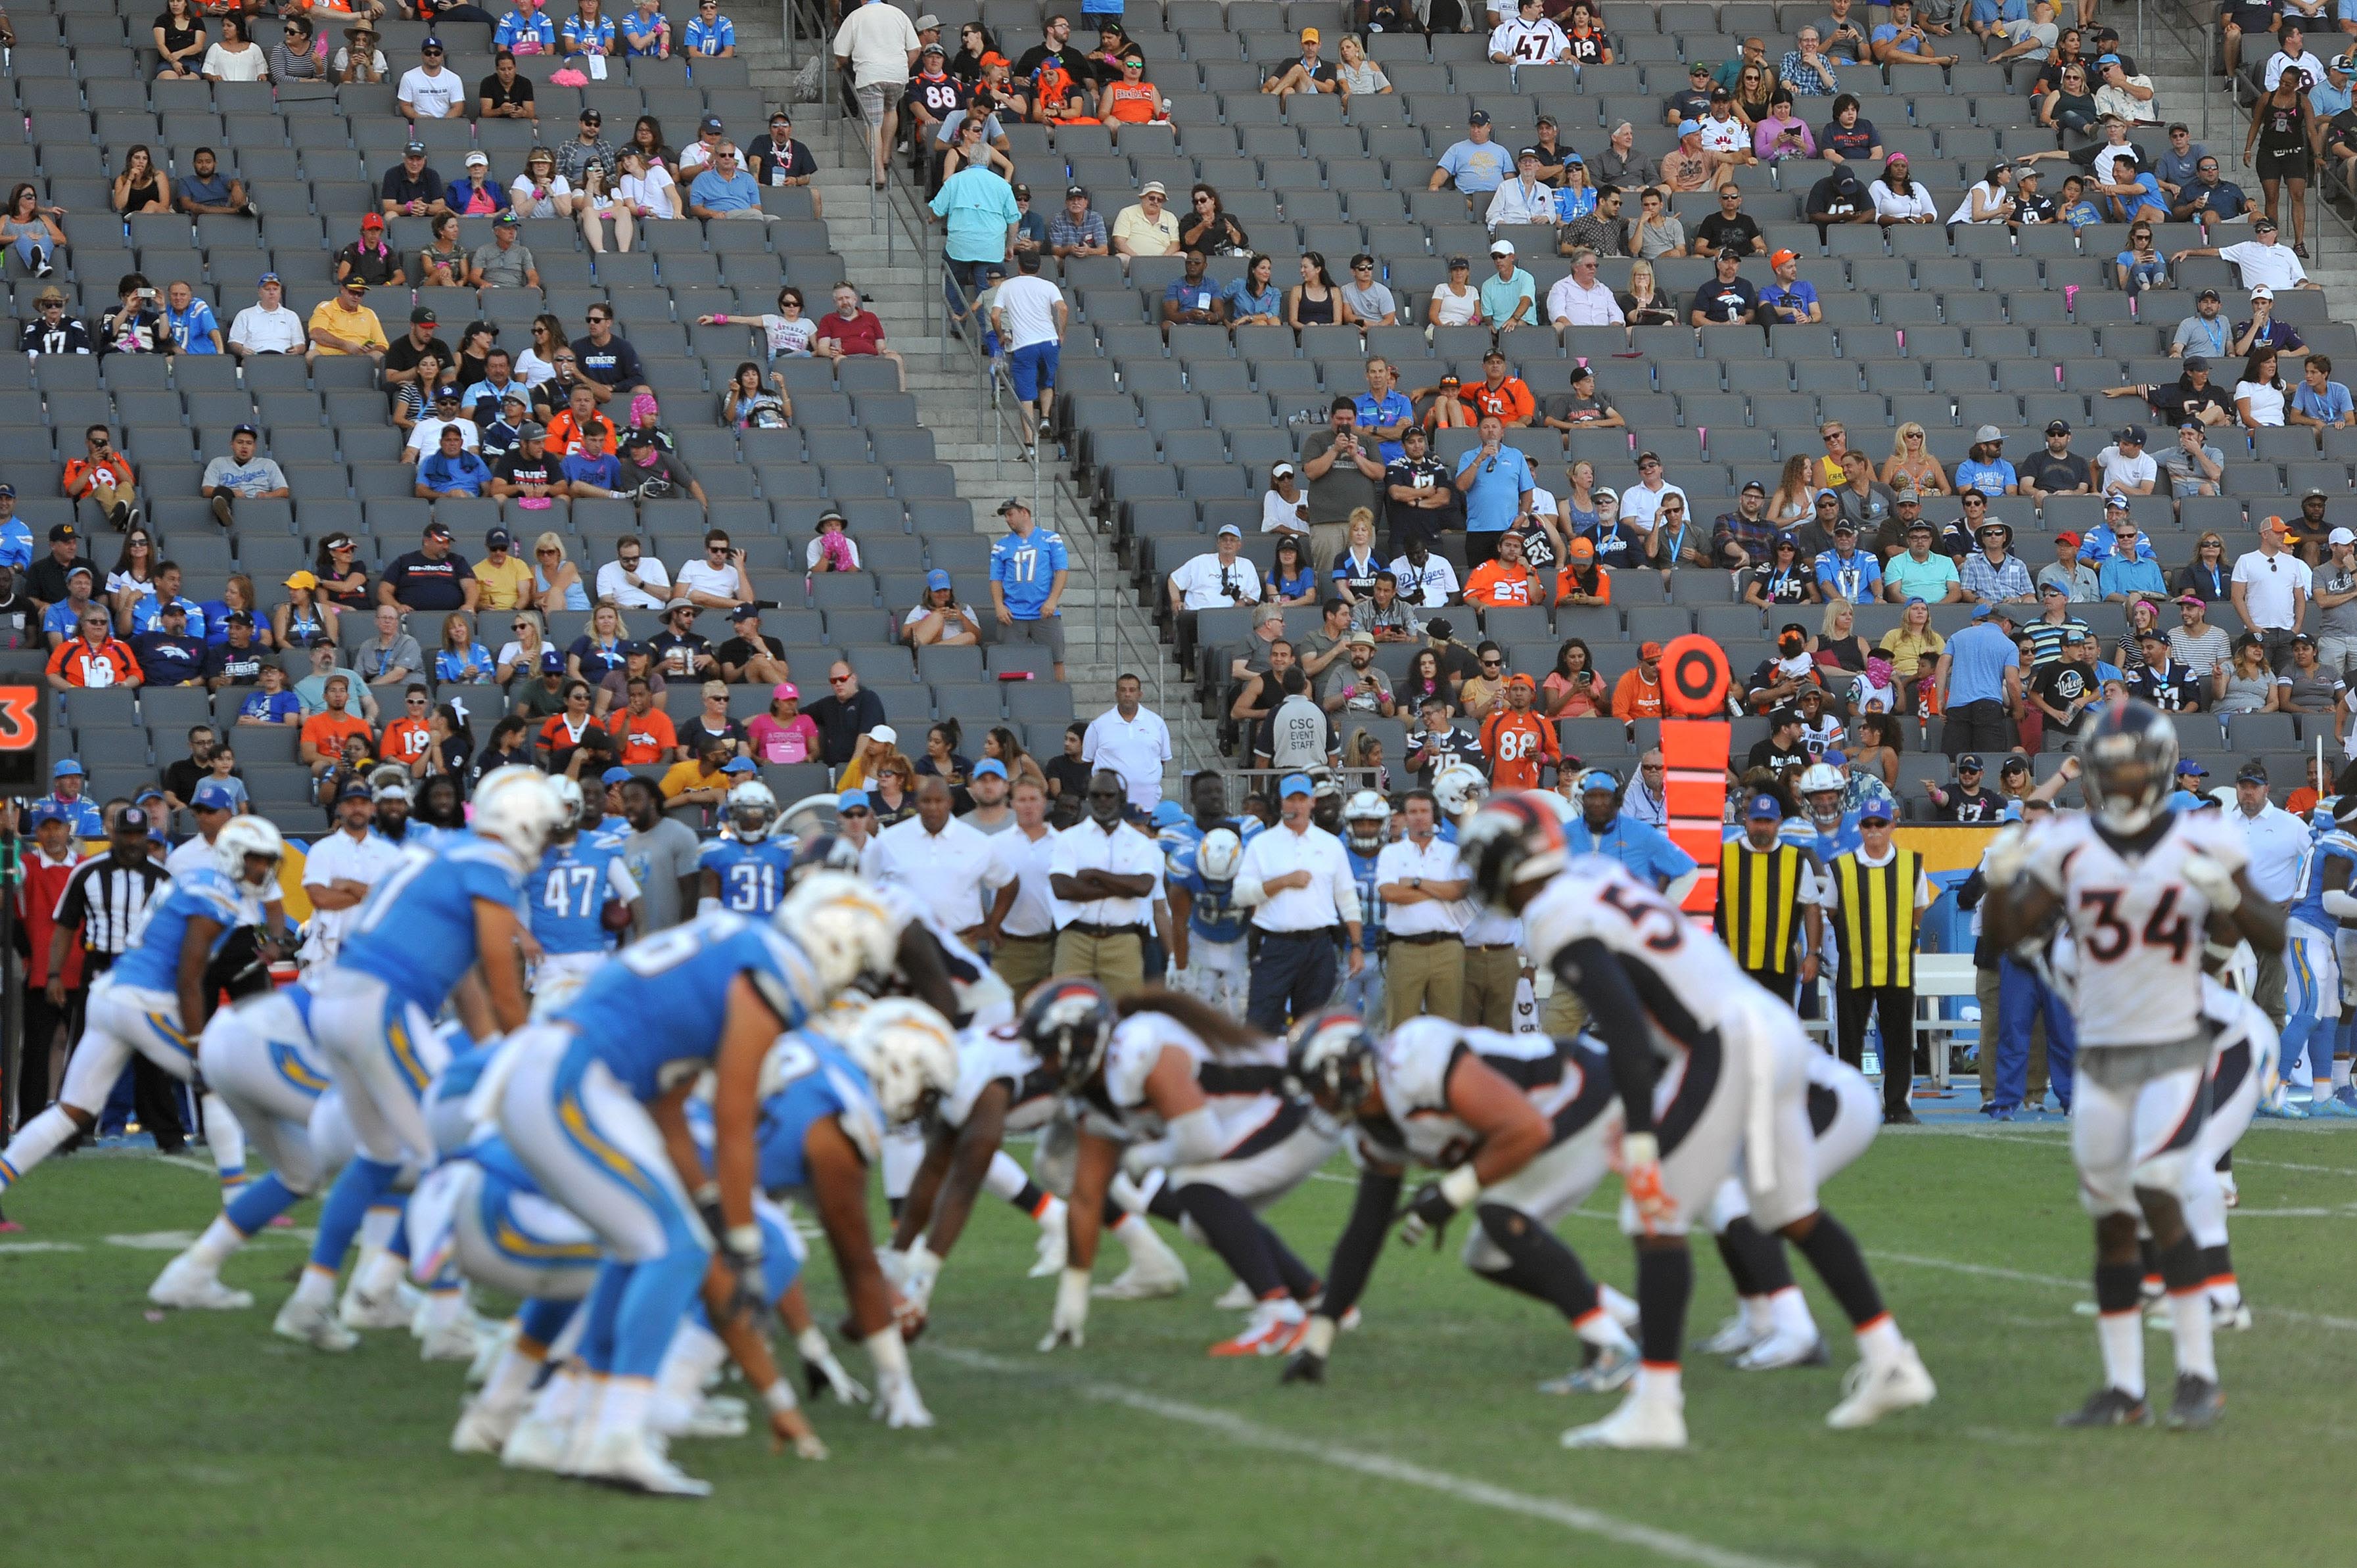 The Browns-Chargers game could have one of the smallest crowds in